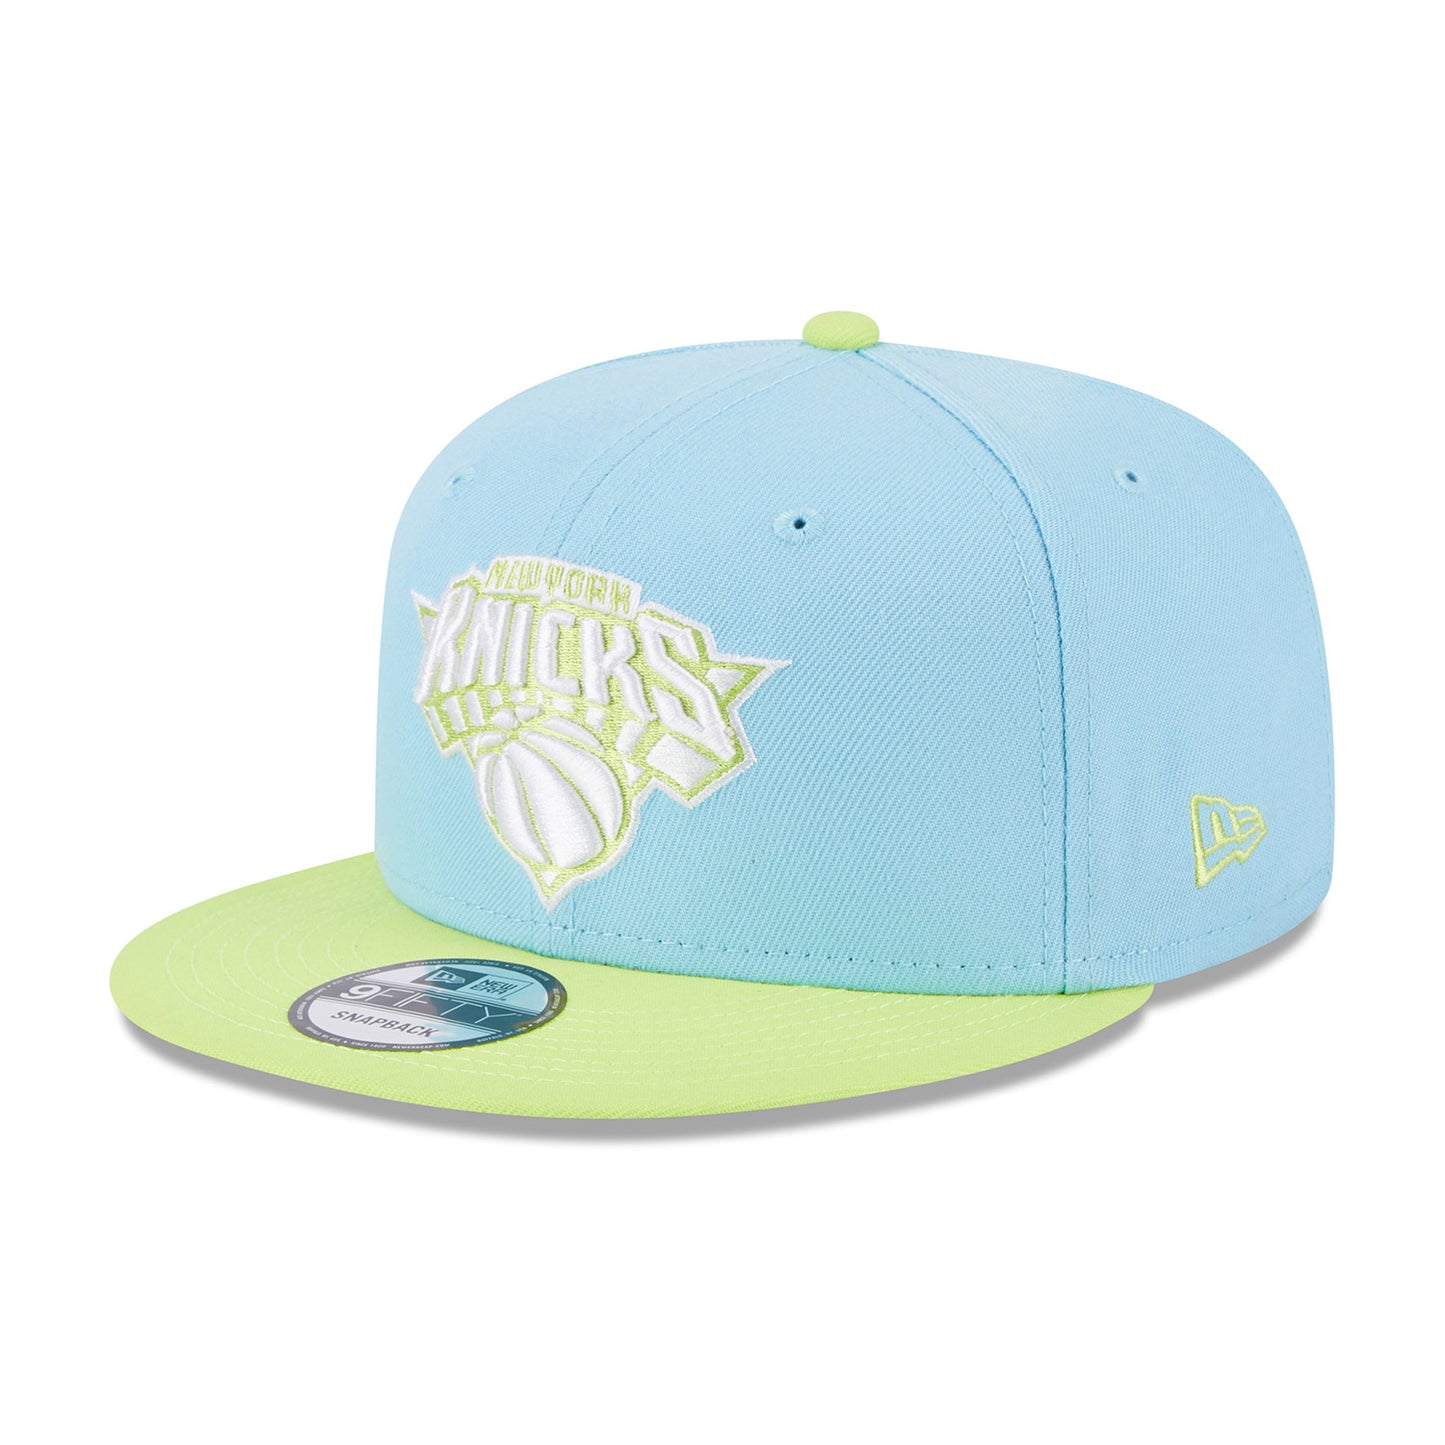 New Era Knicks Colorpack Two Tone Snapback Light Blue/Light Green Hat - Angled Left Side View